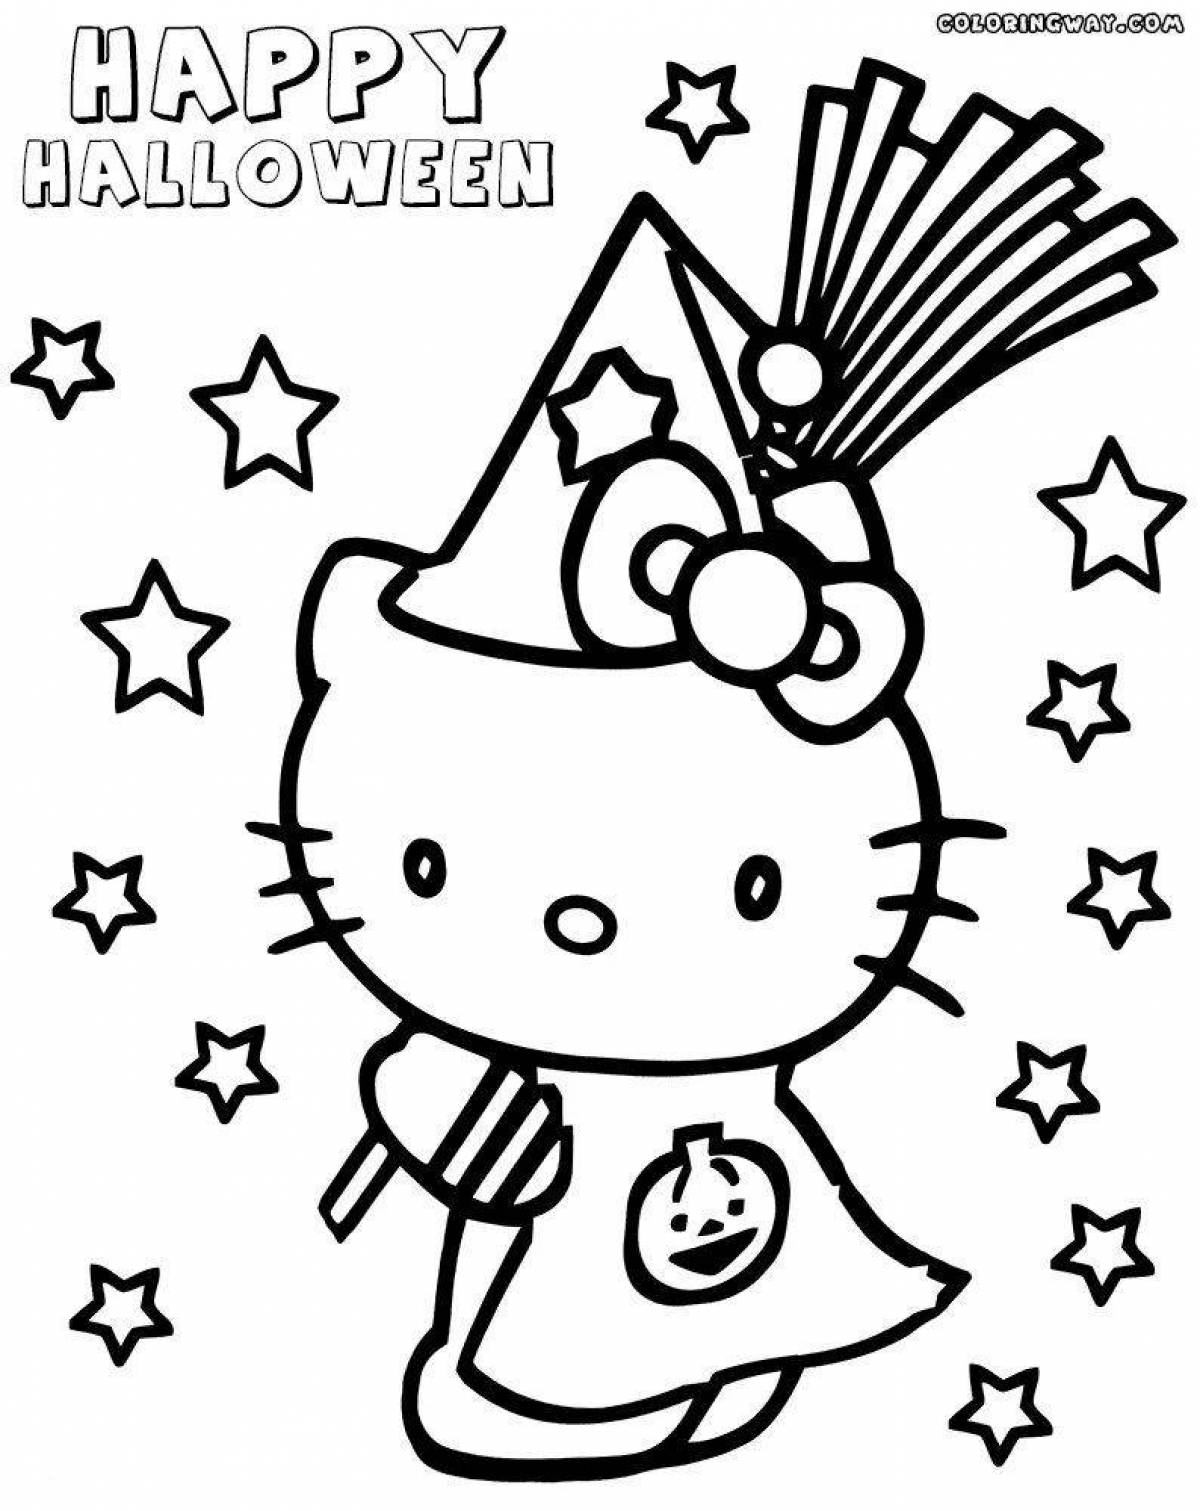 Spooky halloween kitty coloring page